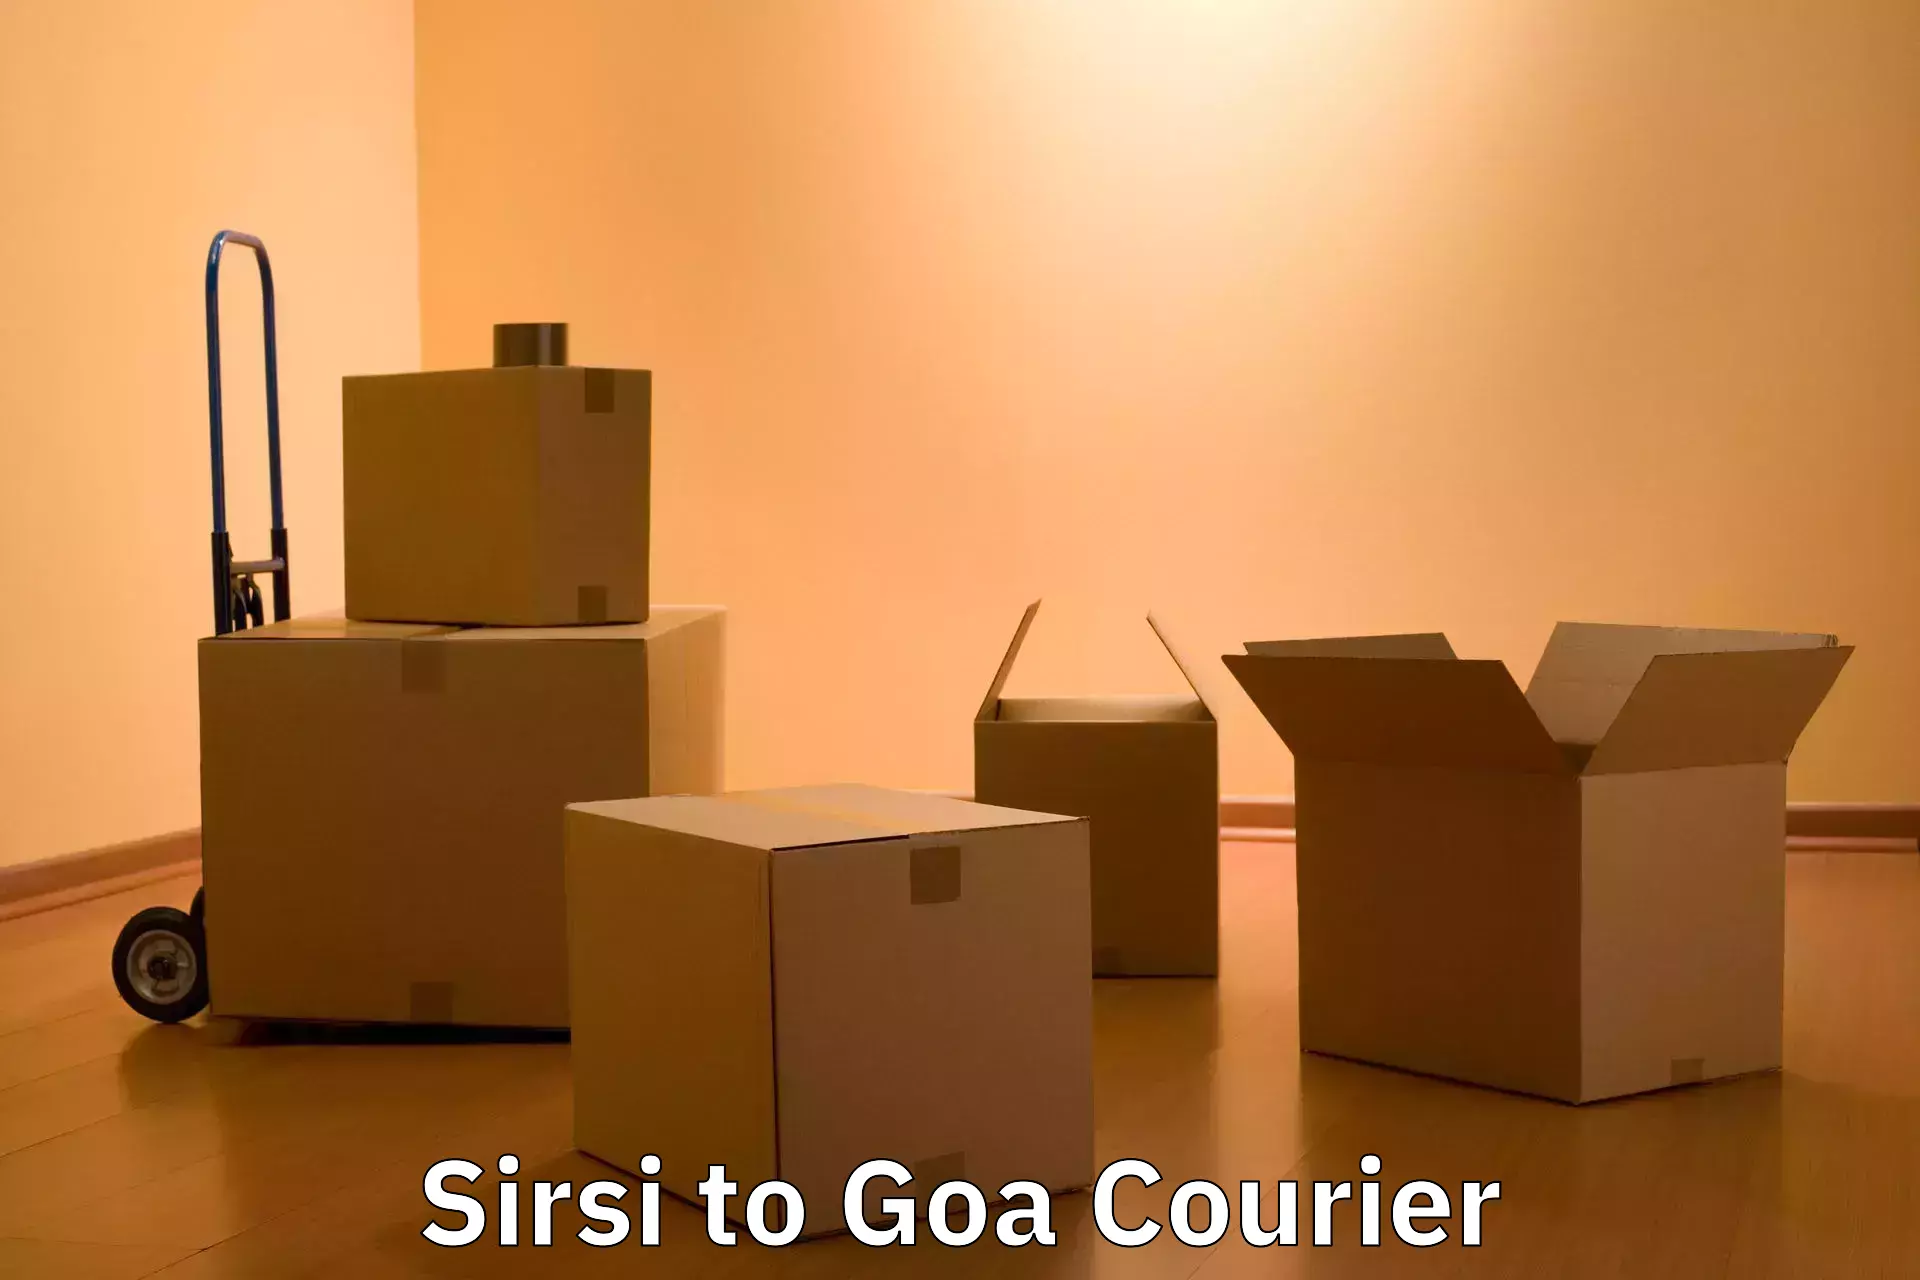 Luggage transport consultancy Sirsi to Goa